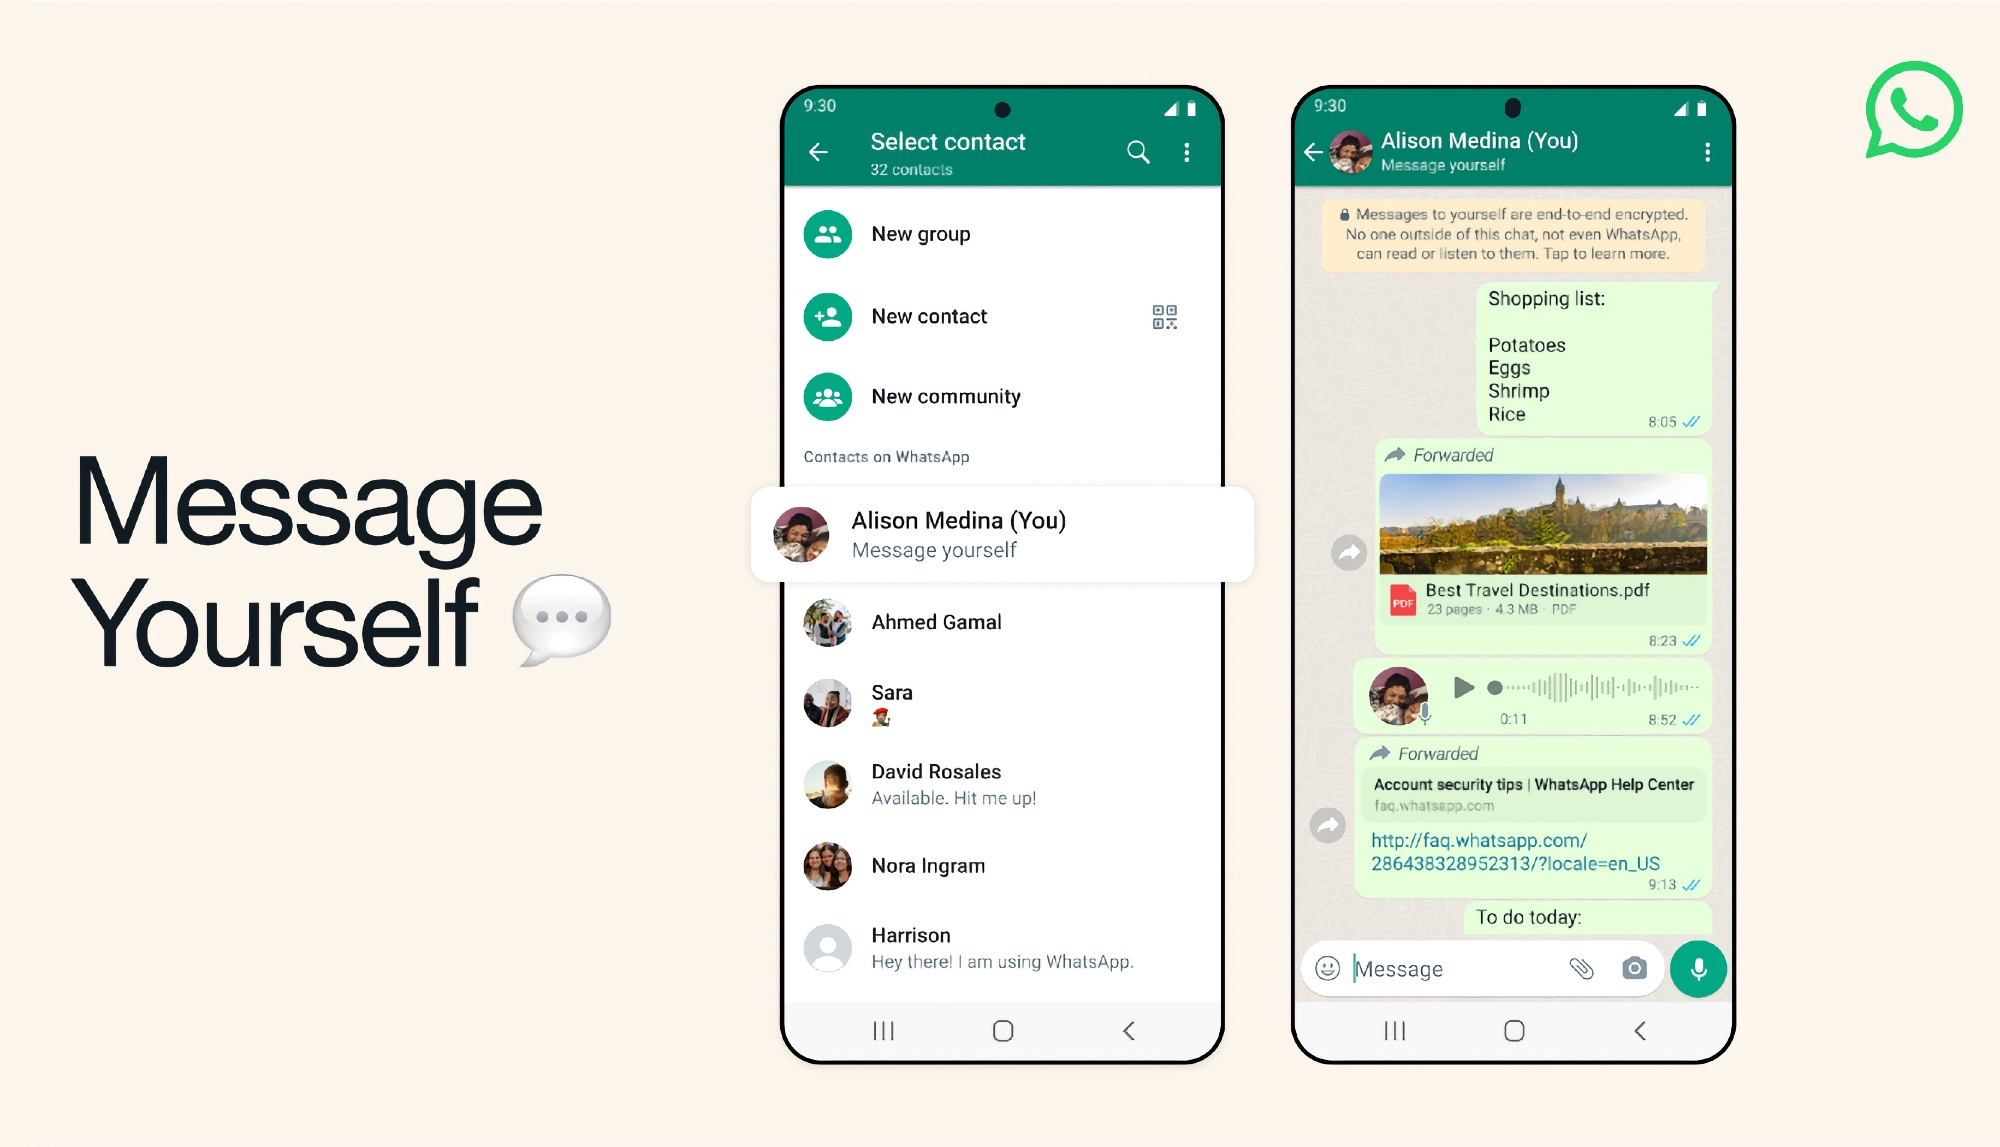 Like Telegram and Viber: WhatsApp has Message Yourself, which allows you to save links, notes and files in the app